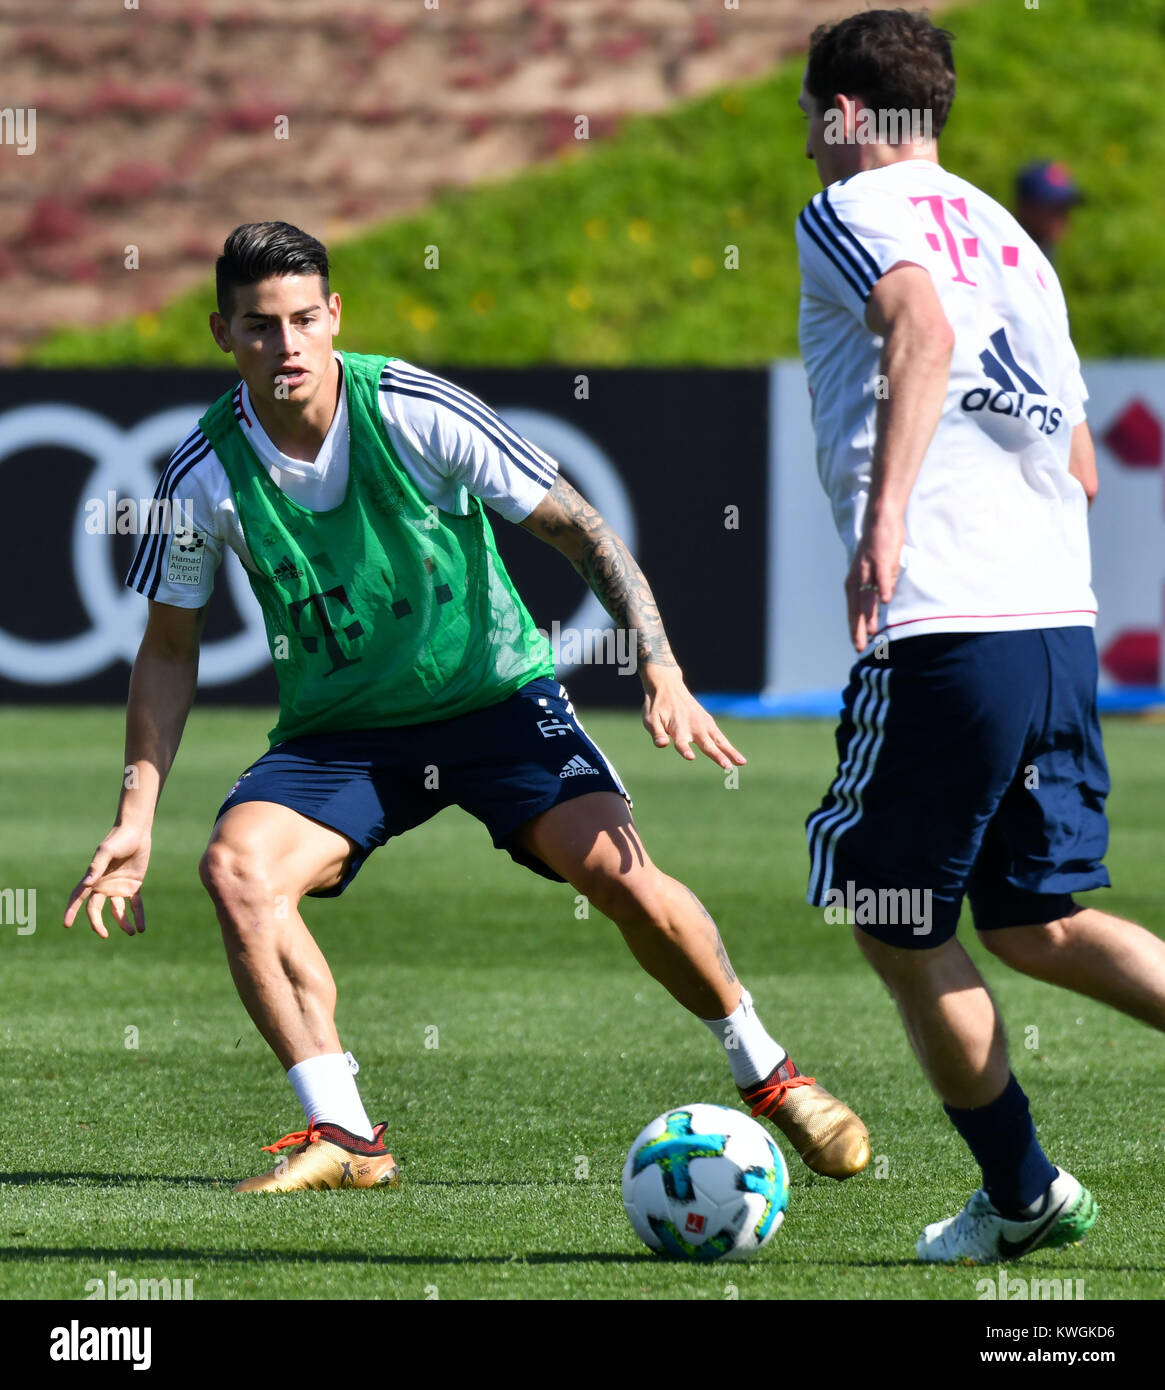 Doha. 3rd Jan, 2018. Bayern Munich's James Rodriguez participates in the training session at the Aspire Academy of Sports Excellence in the Qatari capital Doha on Jan. 3, 2018. Credit: Nikku/Xinhua/Alamy Live News Stock Photo